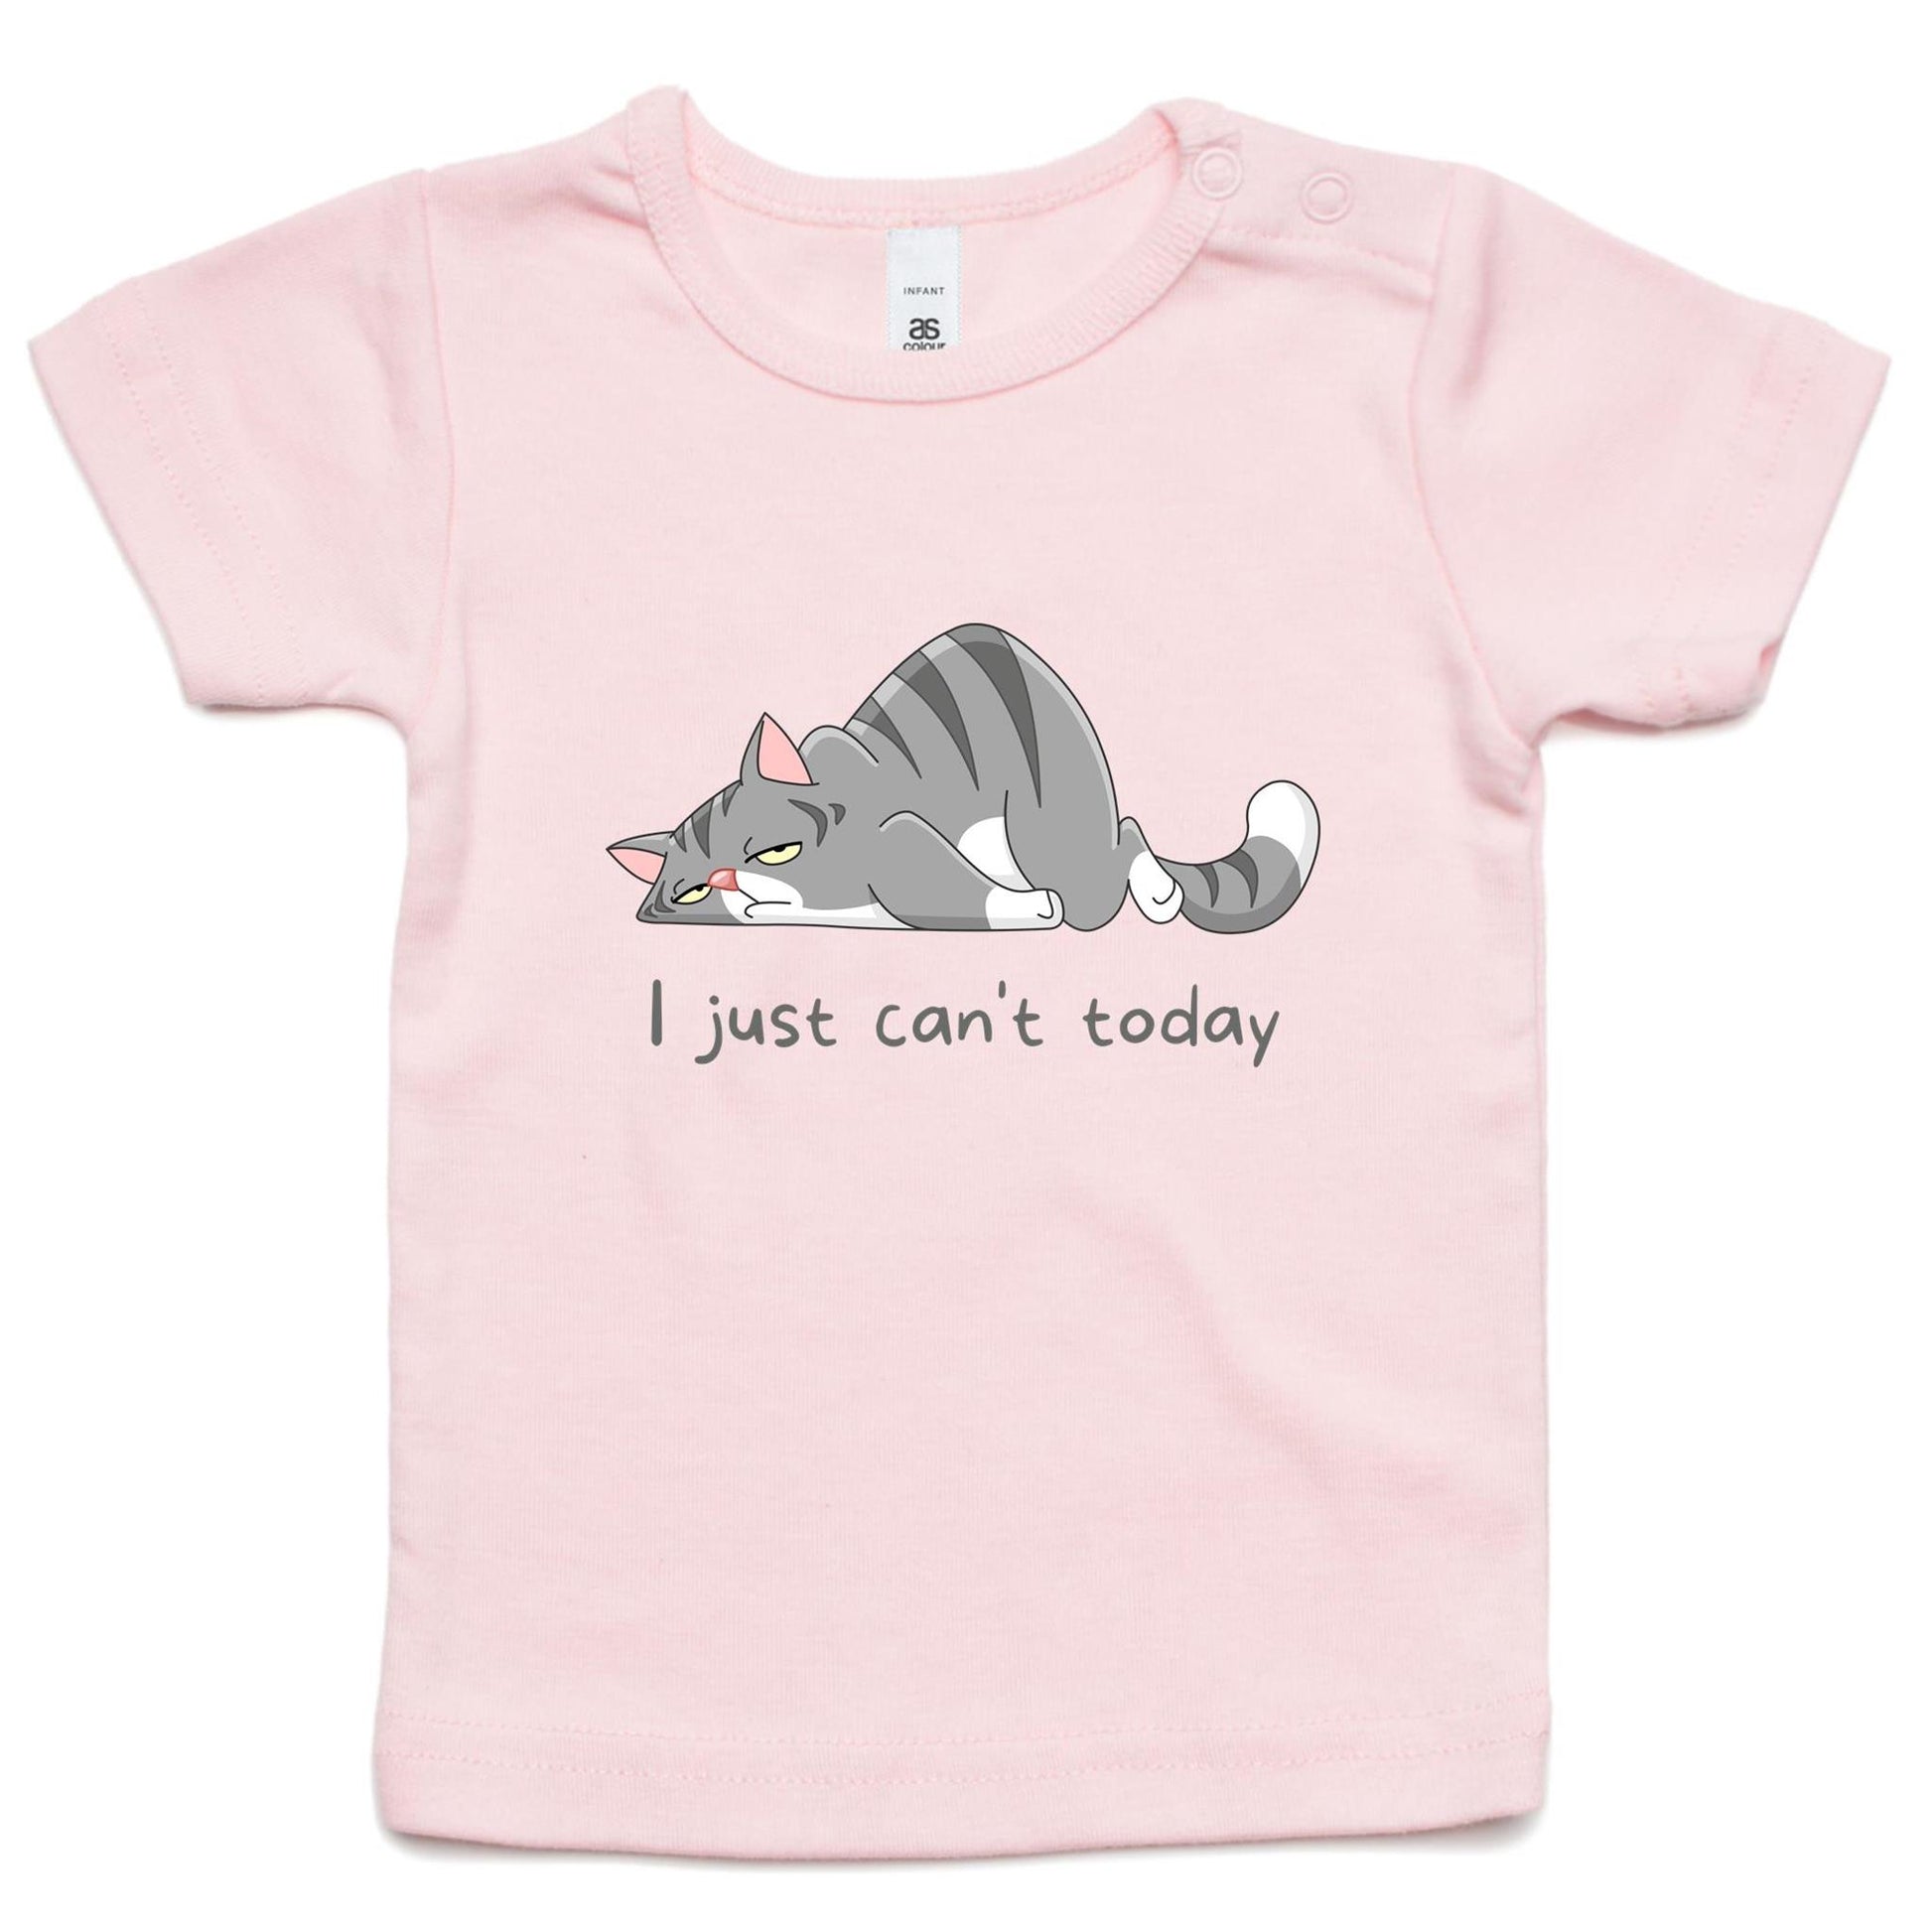 Cat, I Just Can't Today - Baby T-shirt Pink Baby T-shirt animal